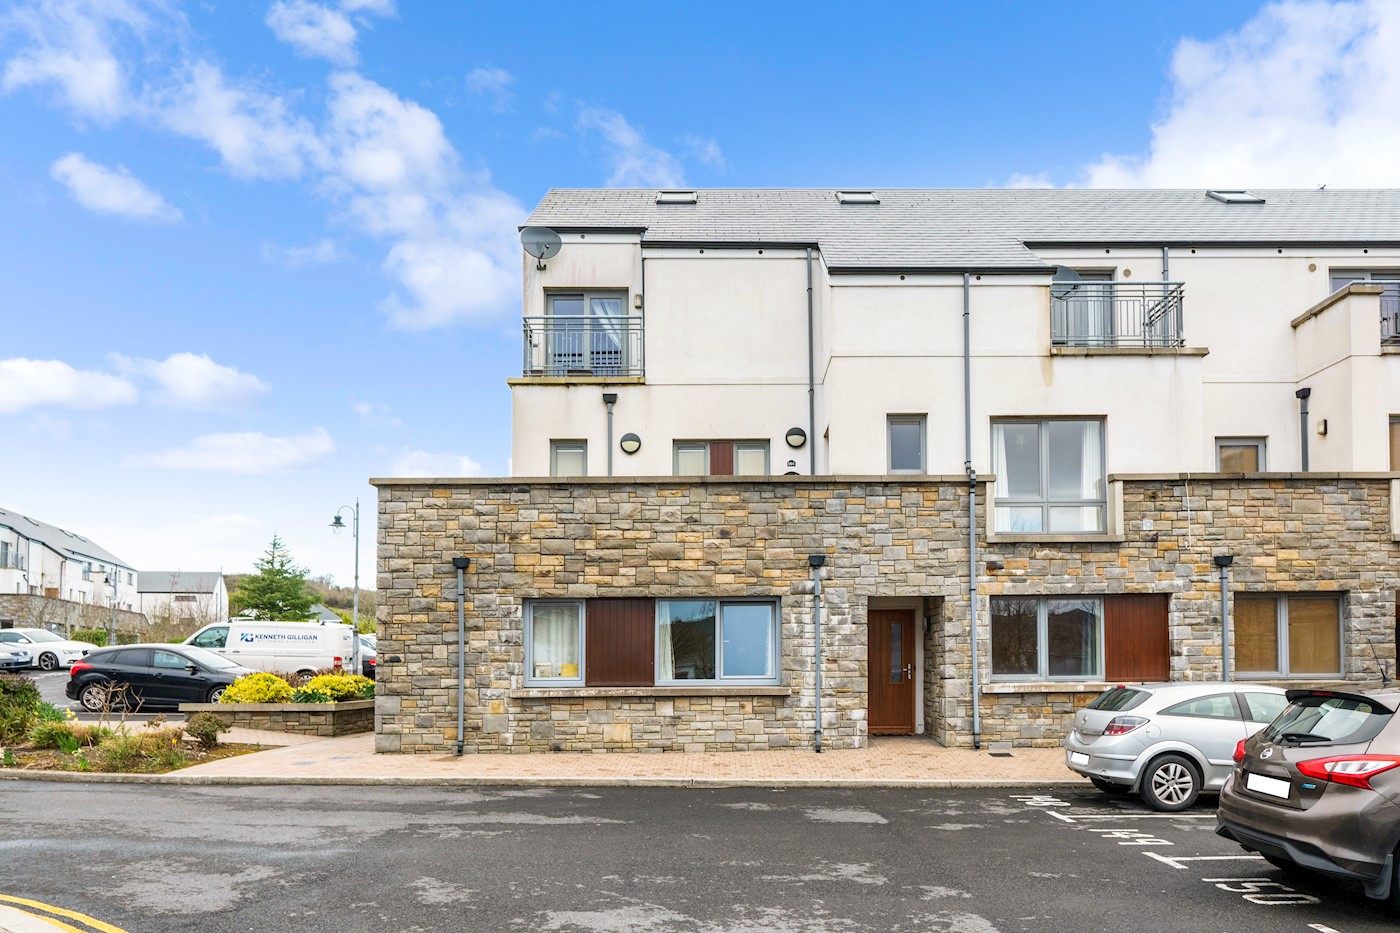 Apartment 148, Caireal Mor, Headford Road, Co. Galway, H91 V990 1/14